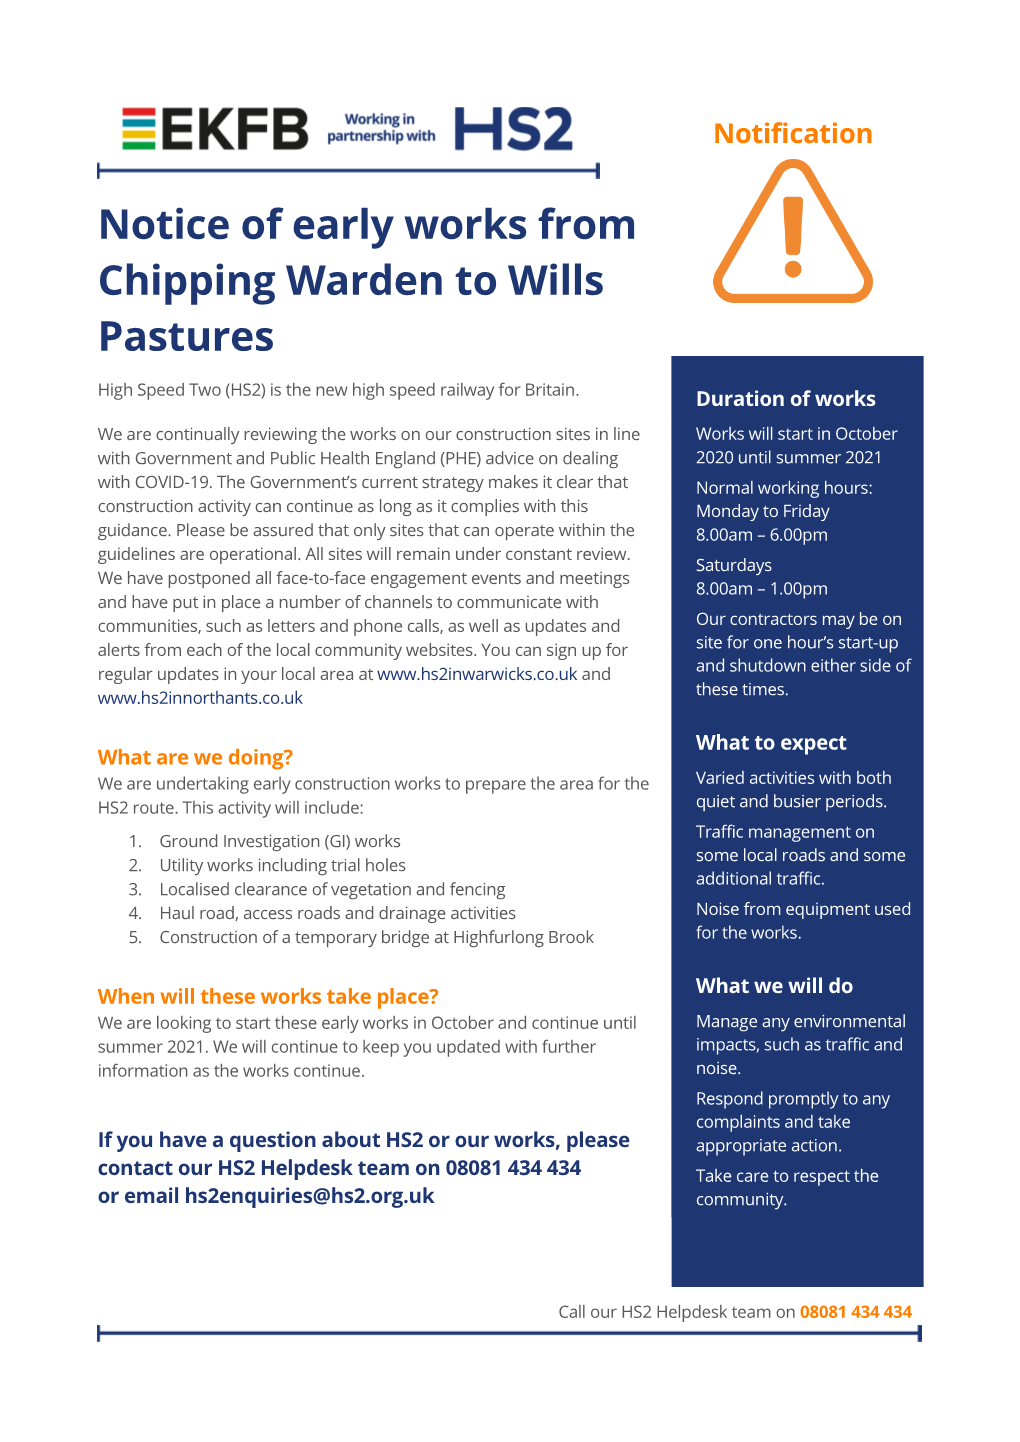 Notice of Early Works from Chipping Warden to Wills Pastures September 2020 | High Speed Two (HS2) Is the New High Speed Railway for Britain